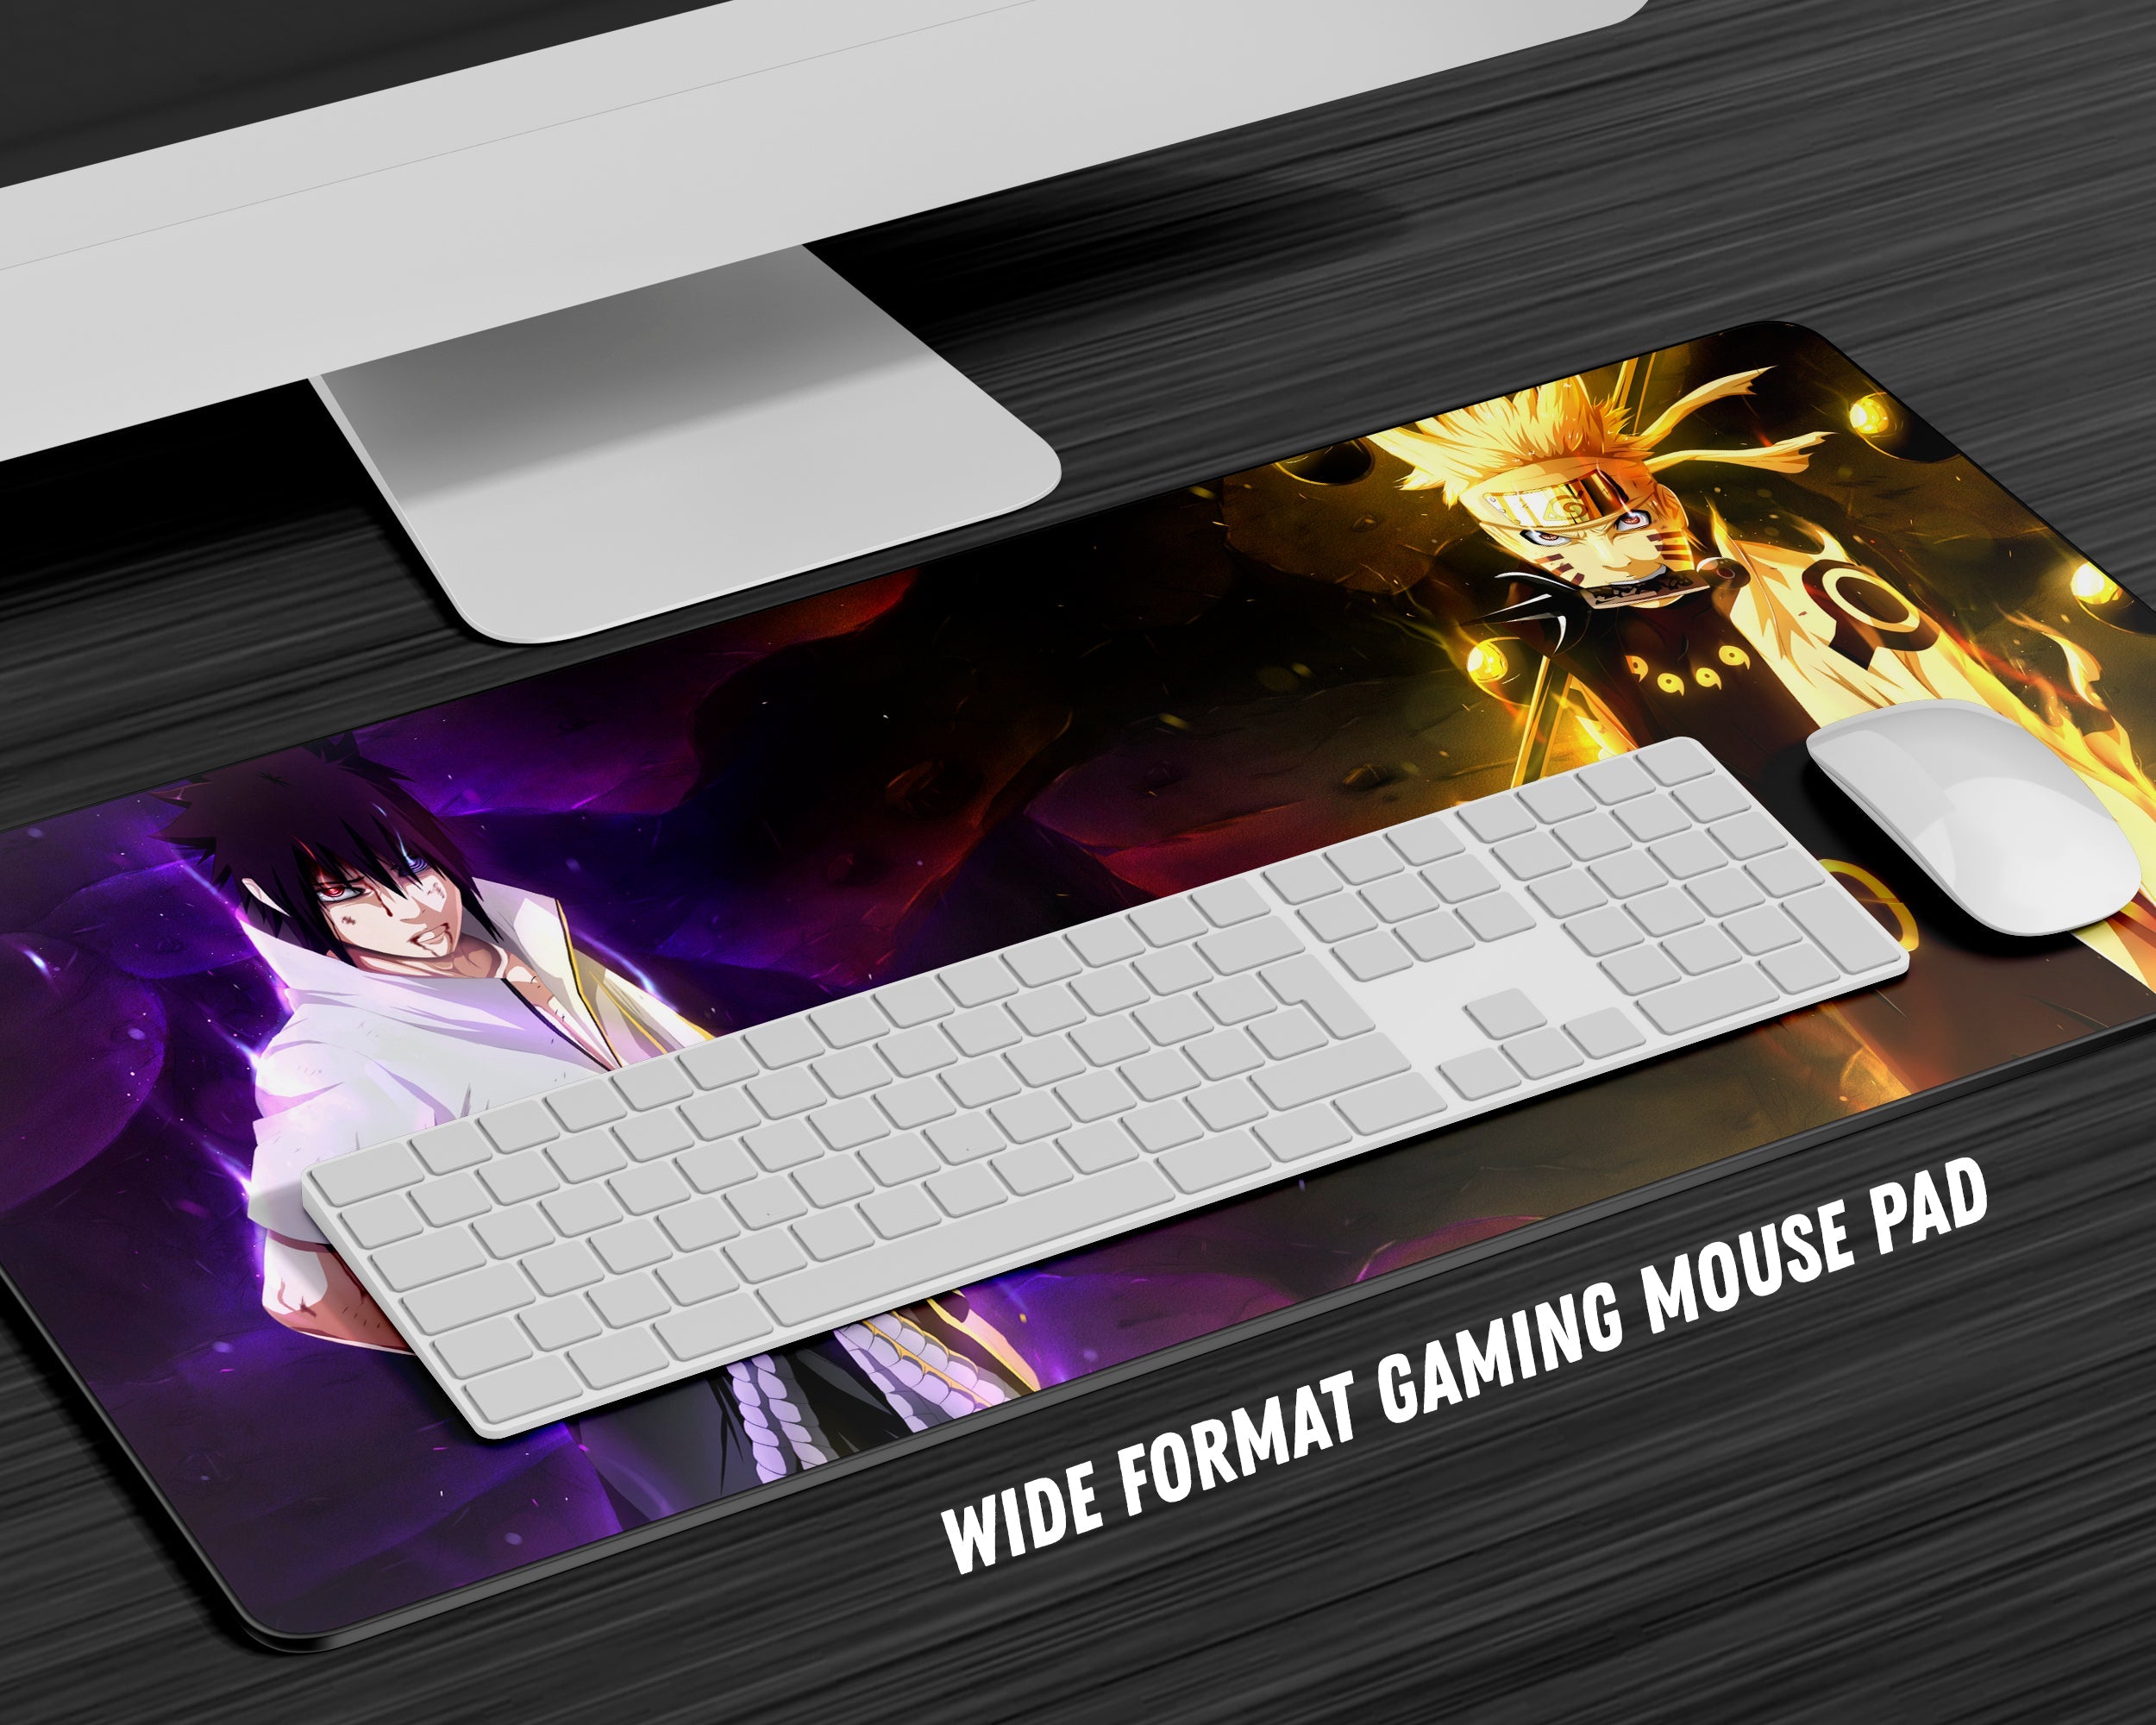 Amazon.com: Mouse Pads Anime Girl Sexy RGB Mouse Pad Anime Game Computer  Accessories Game Glowing LED Keyboard Mat 27.55 inch x12 inch- A4 : Video  Games